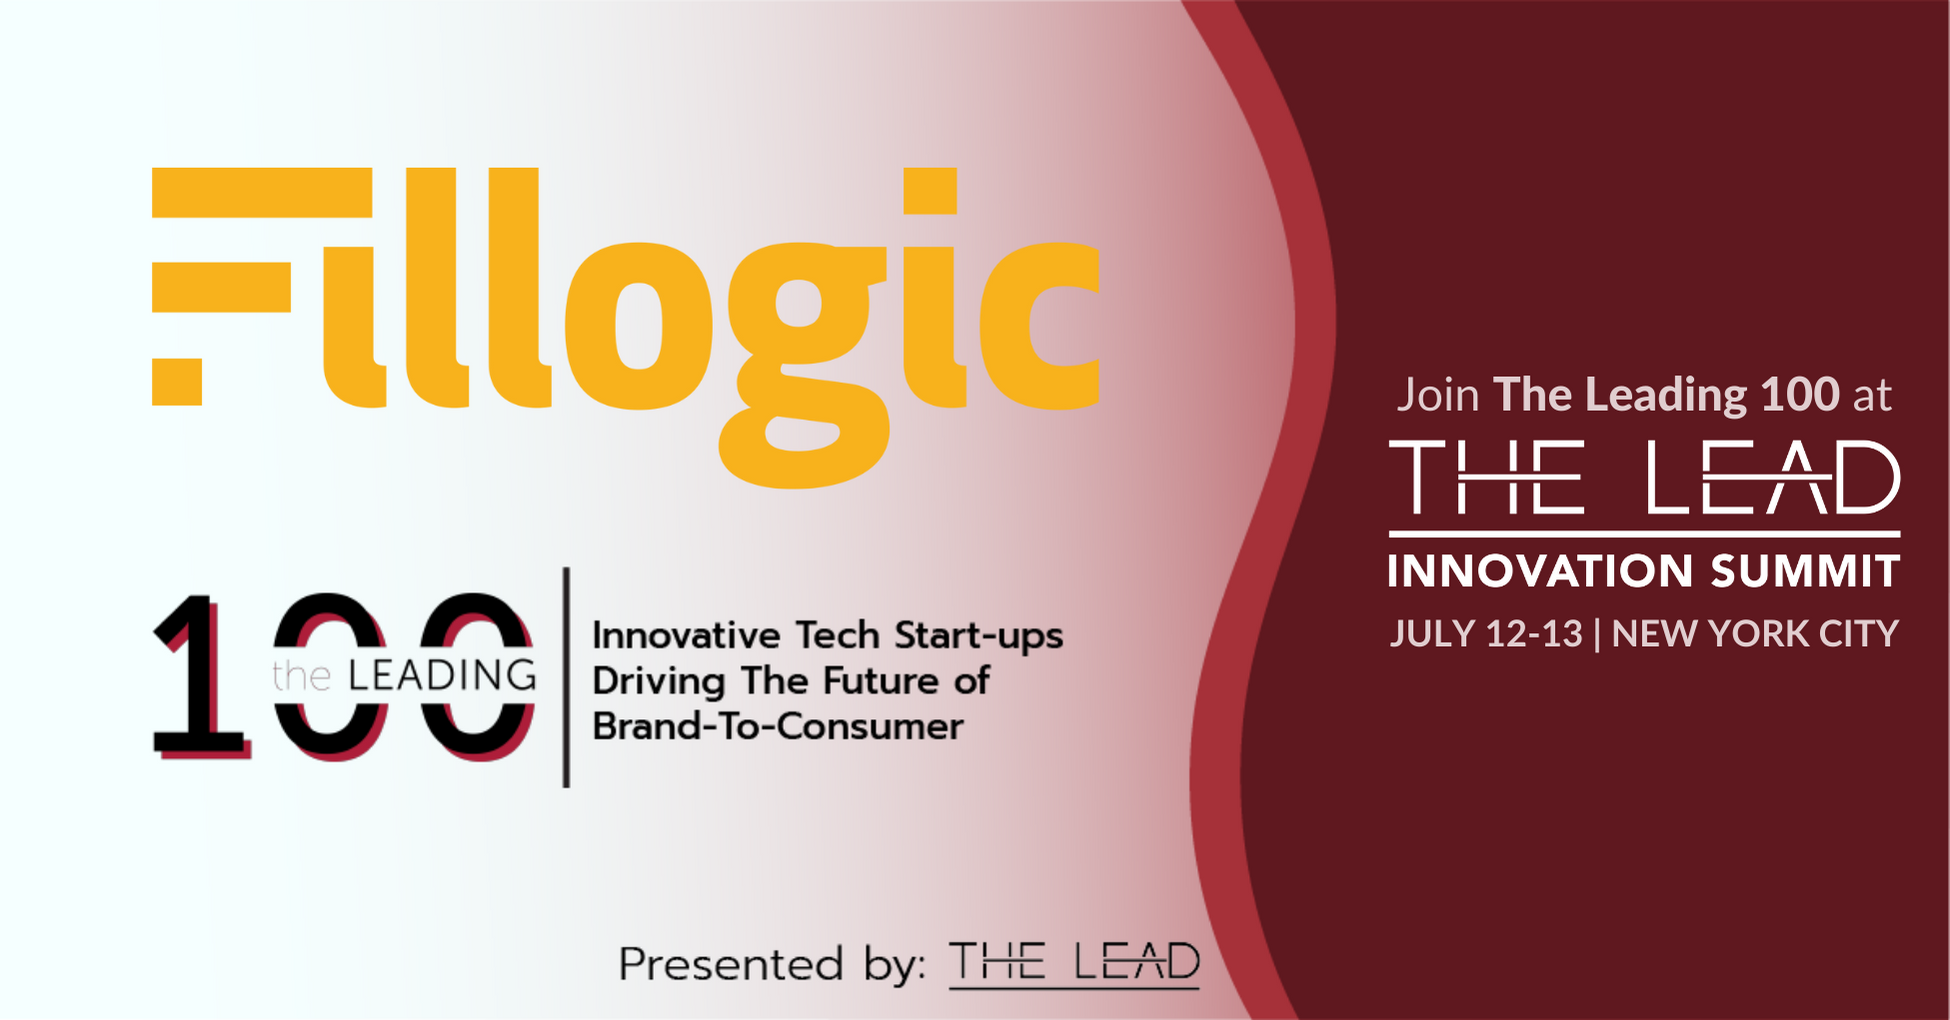 Fillogic Named to The Leading 100 List of Innovative Tech Startups by The Lead